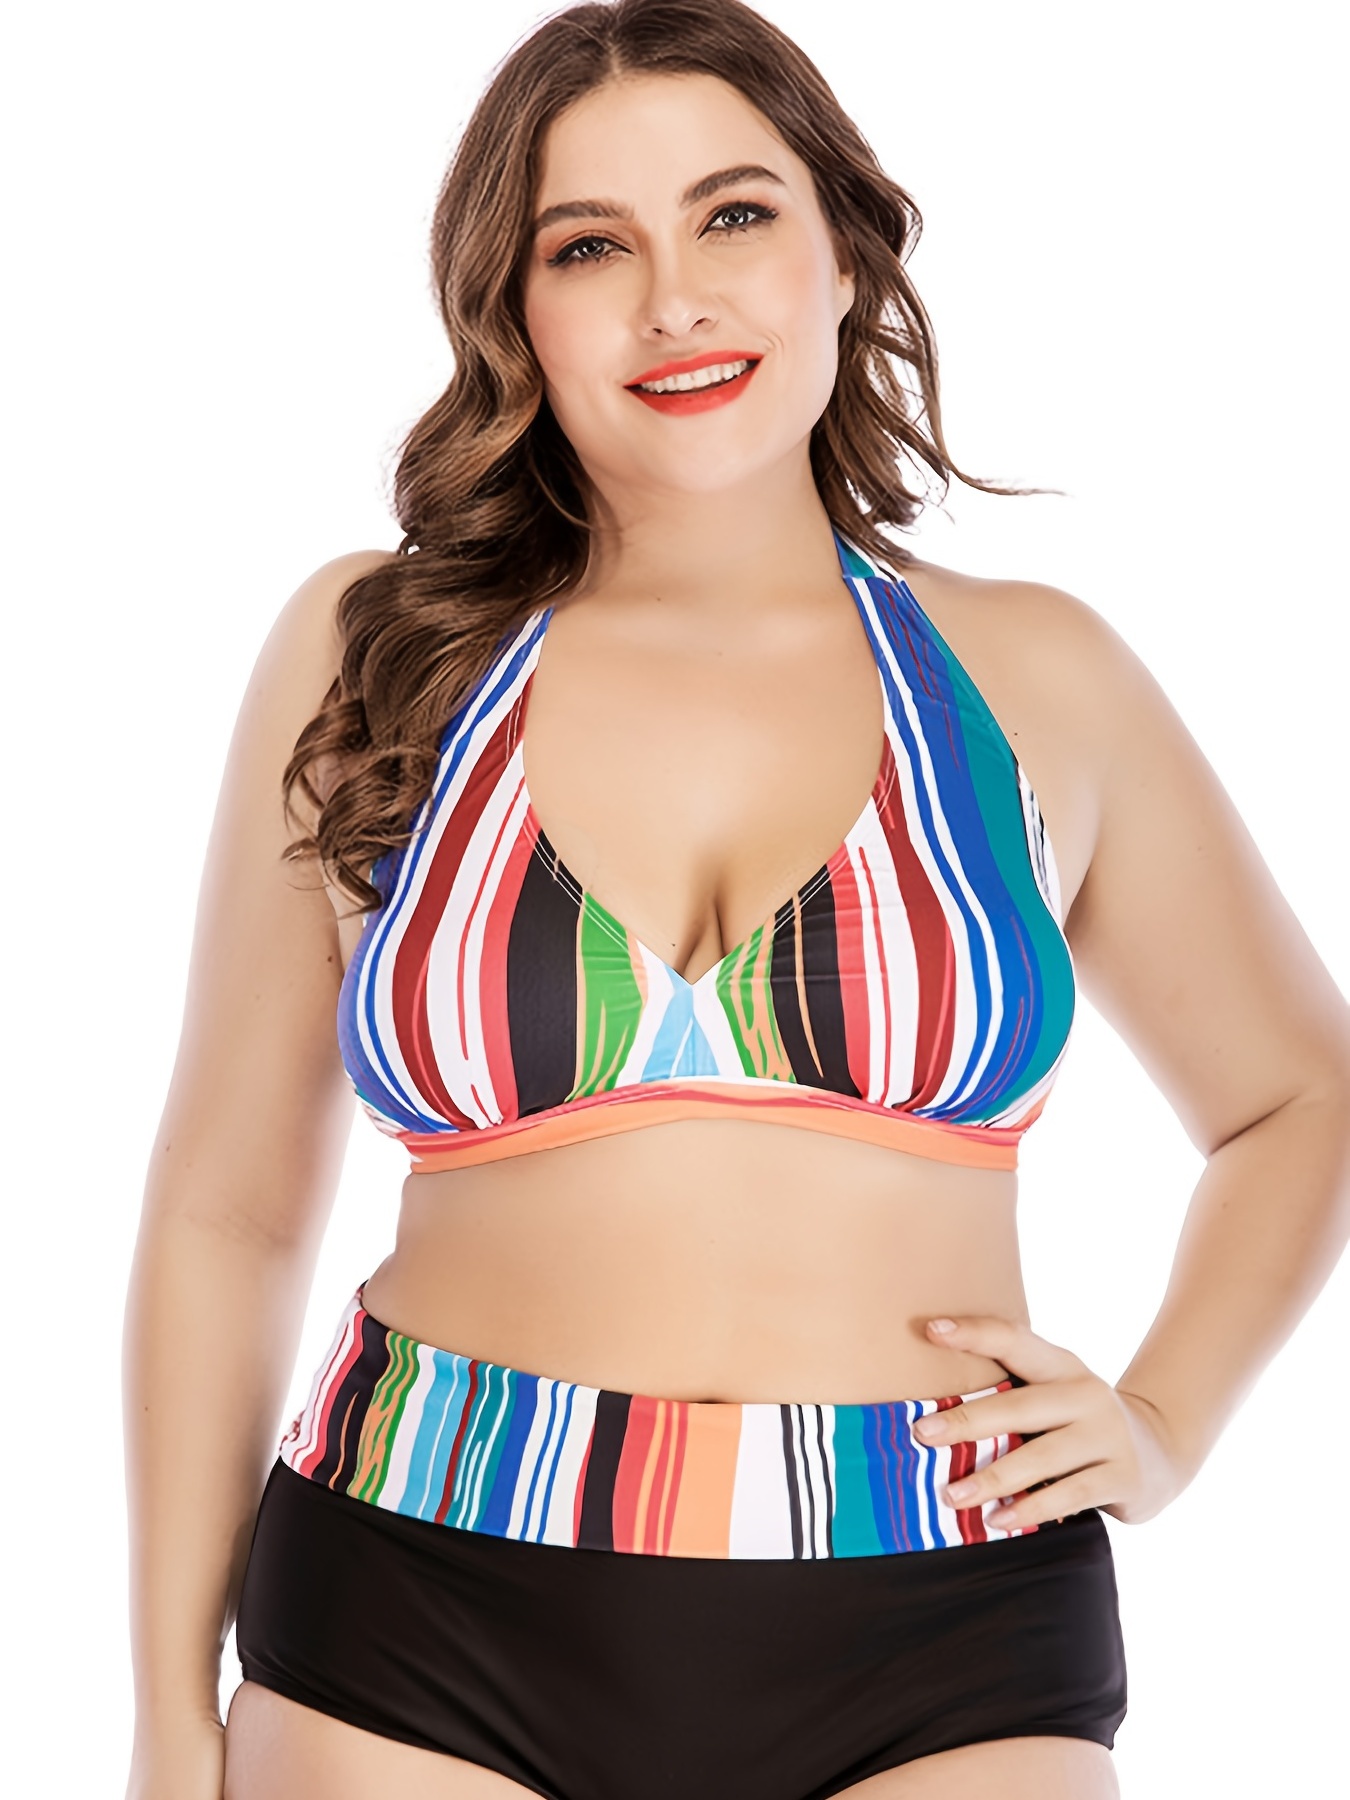 All bodies should be celebrated': Plus-size models star in swimsuit calendar